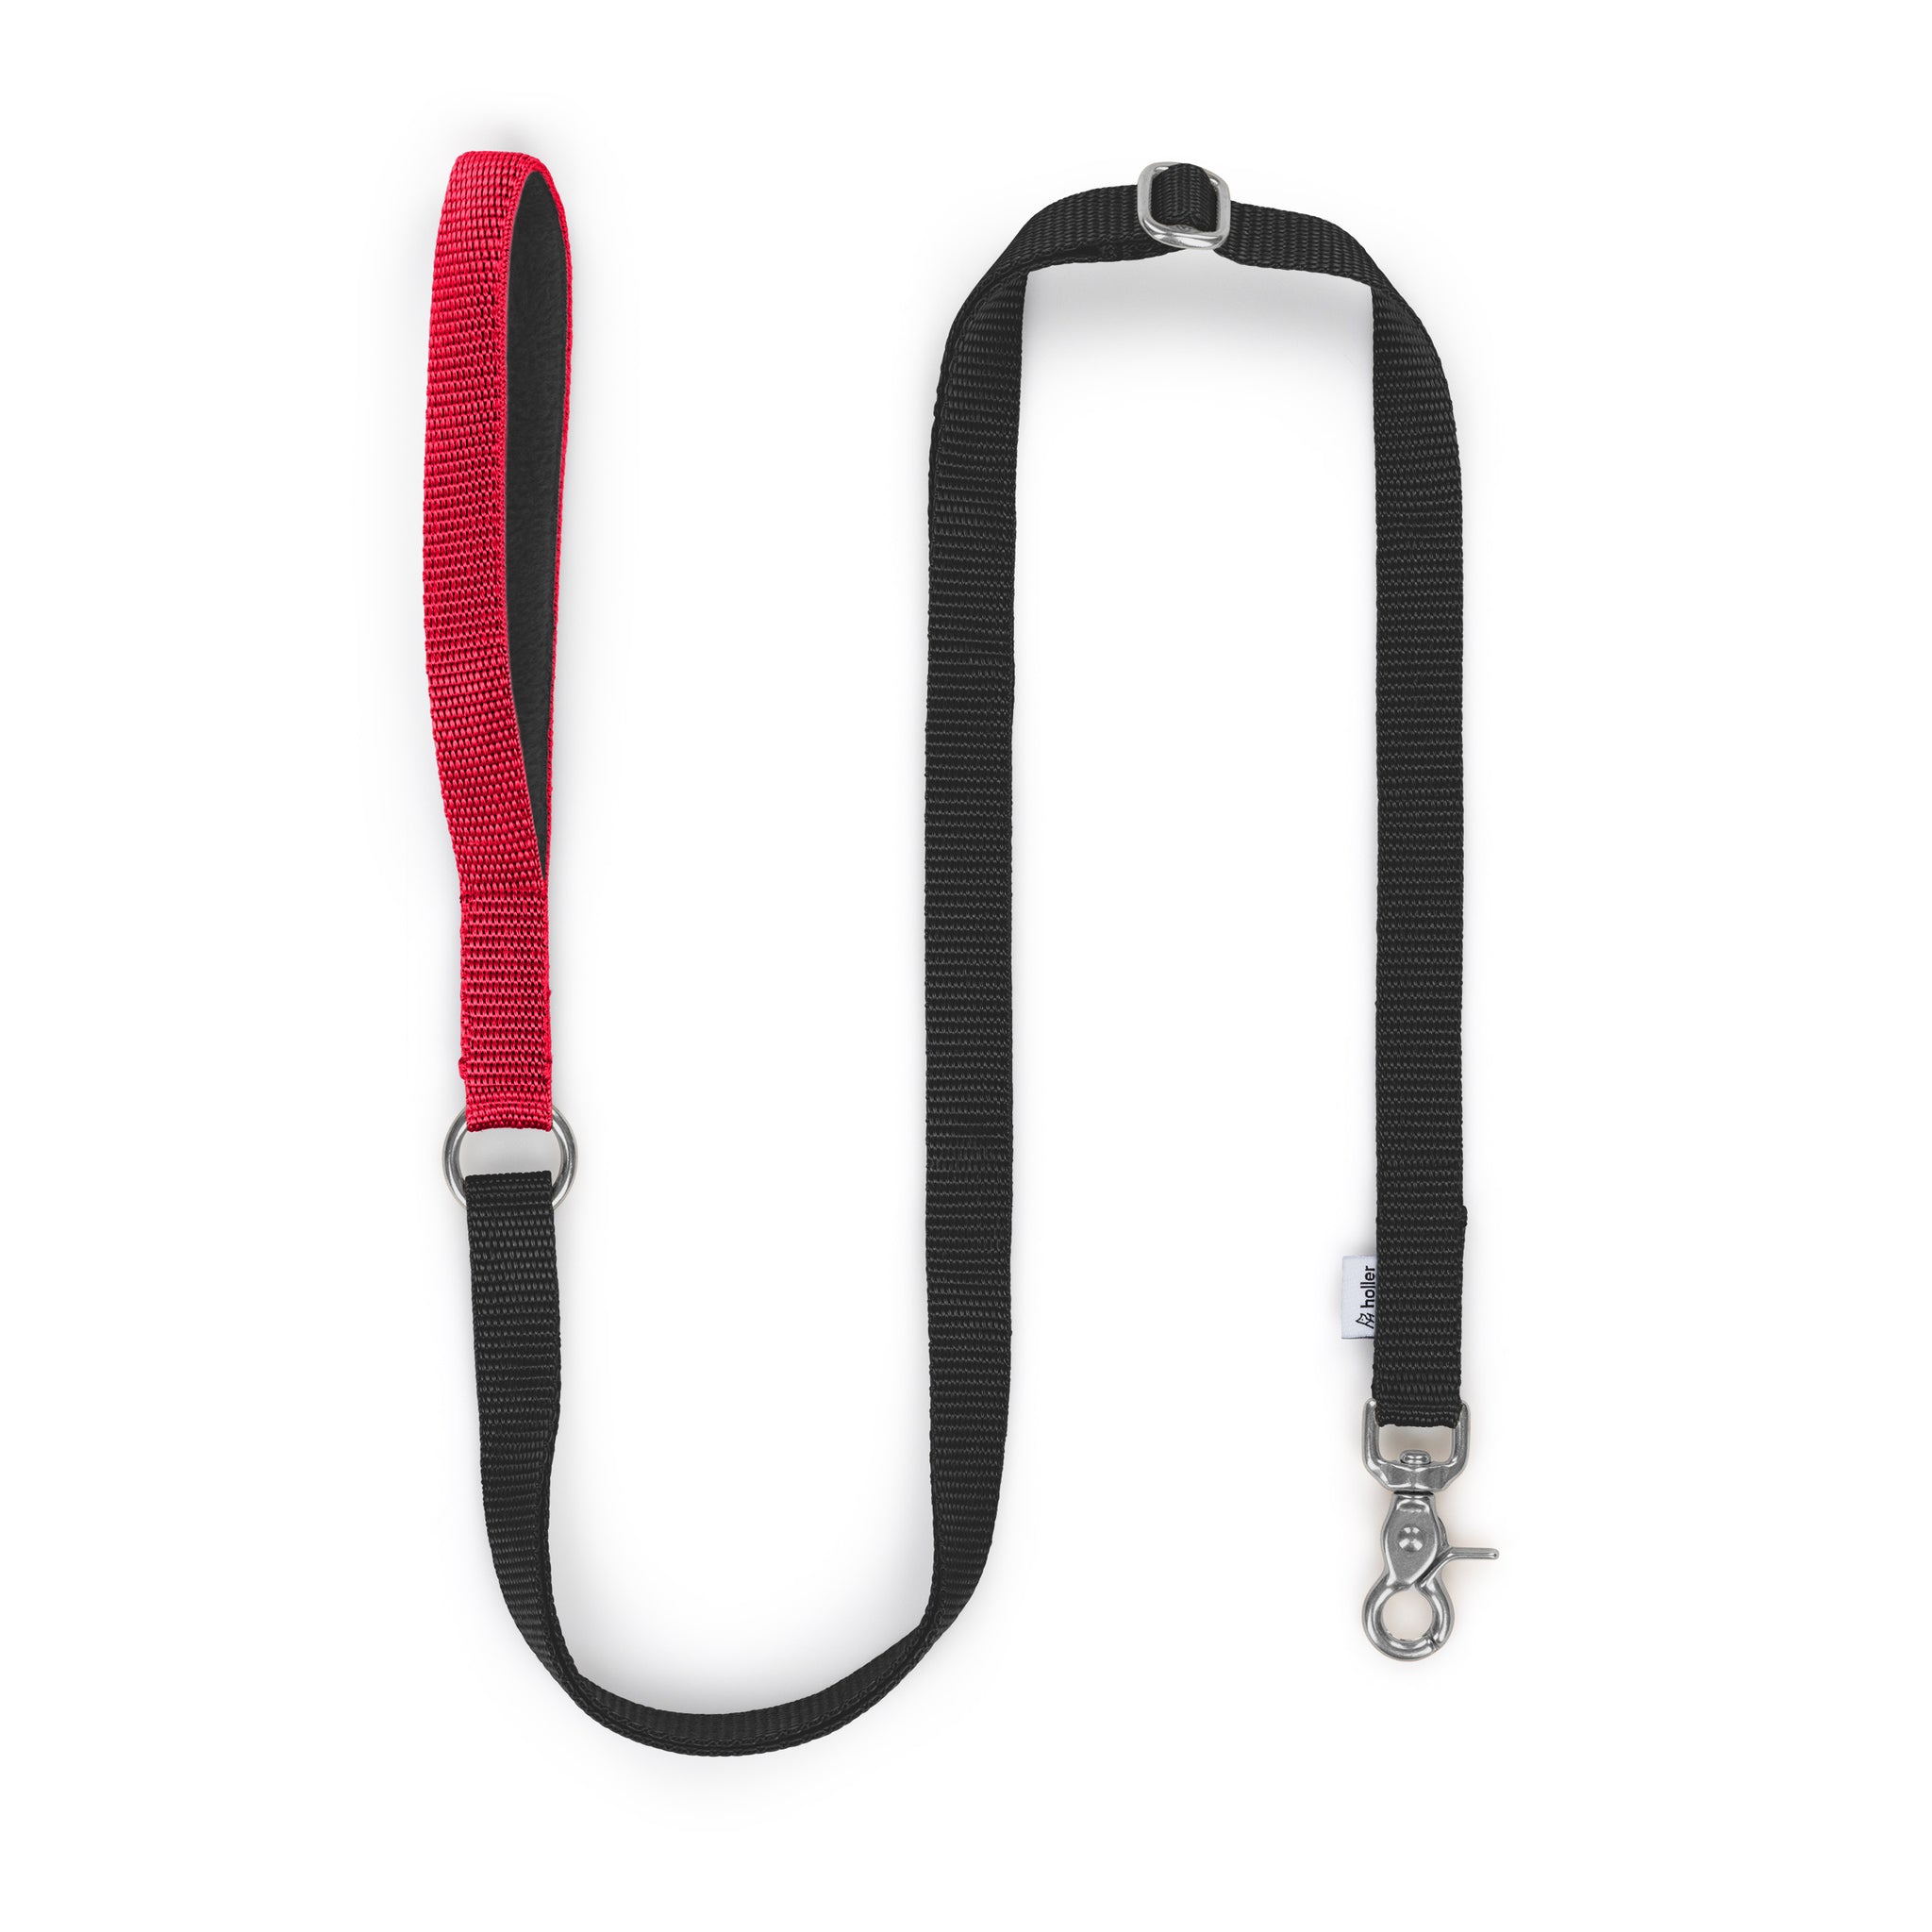 Black + Red Custom-made Extendable Lead - With Soft Touch Handle. - Pet Leashes - Holler Brighton - Holler Brighton